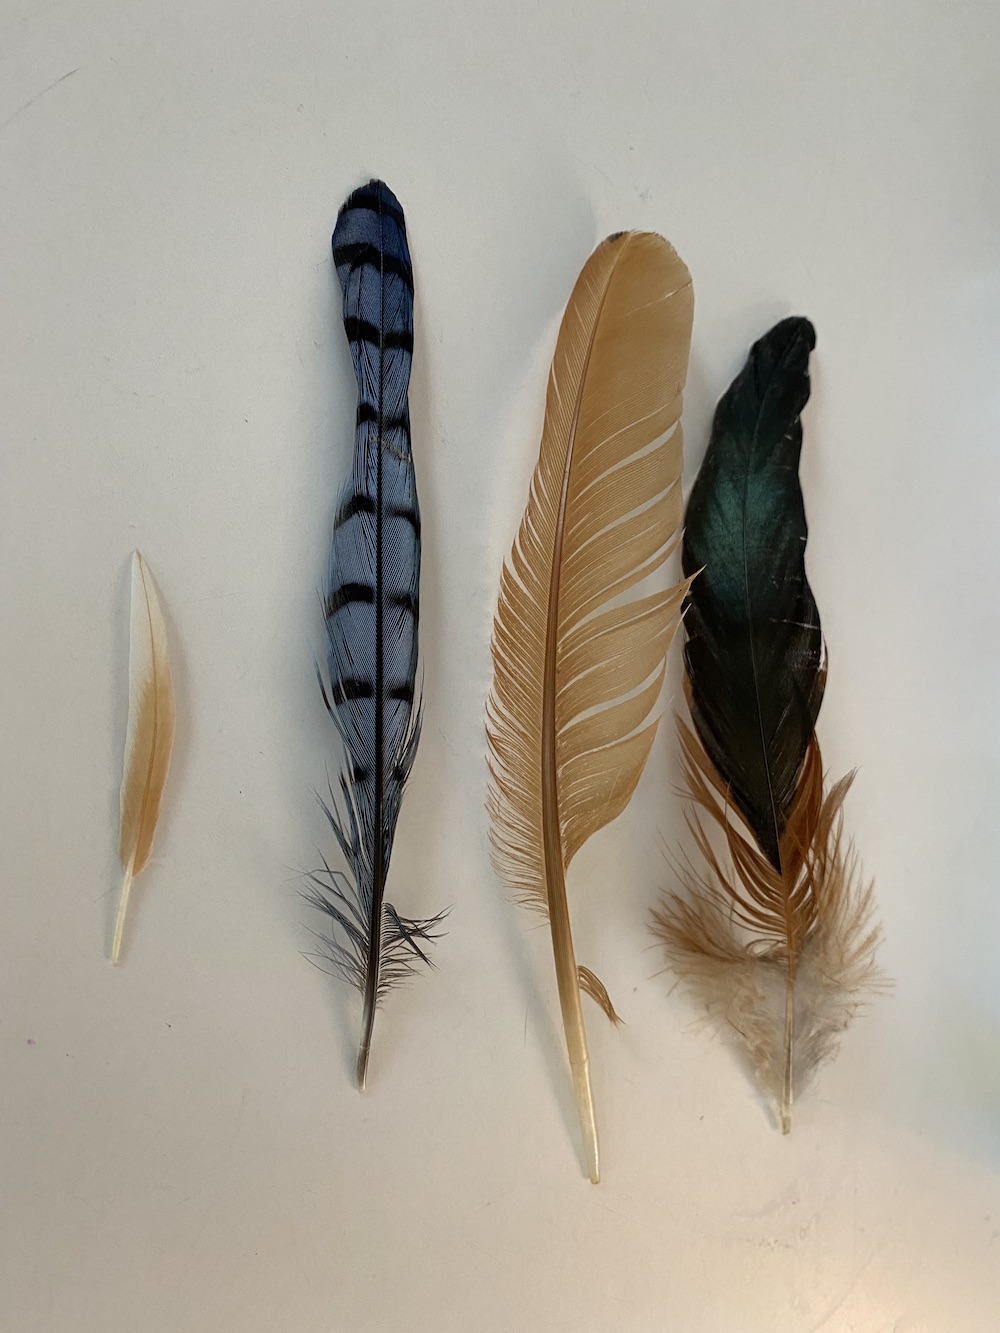 Finding humanity in a feather – My Inside Voices